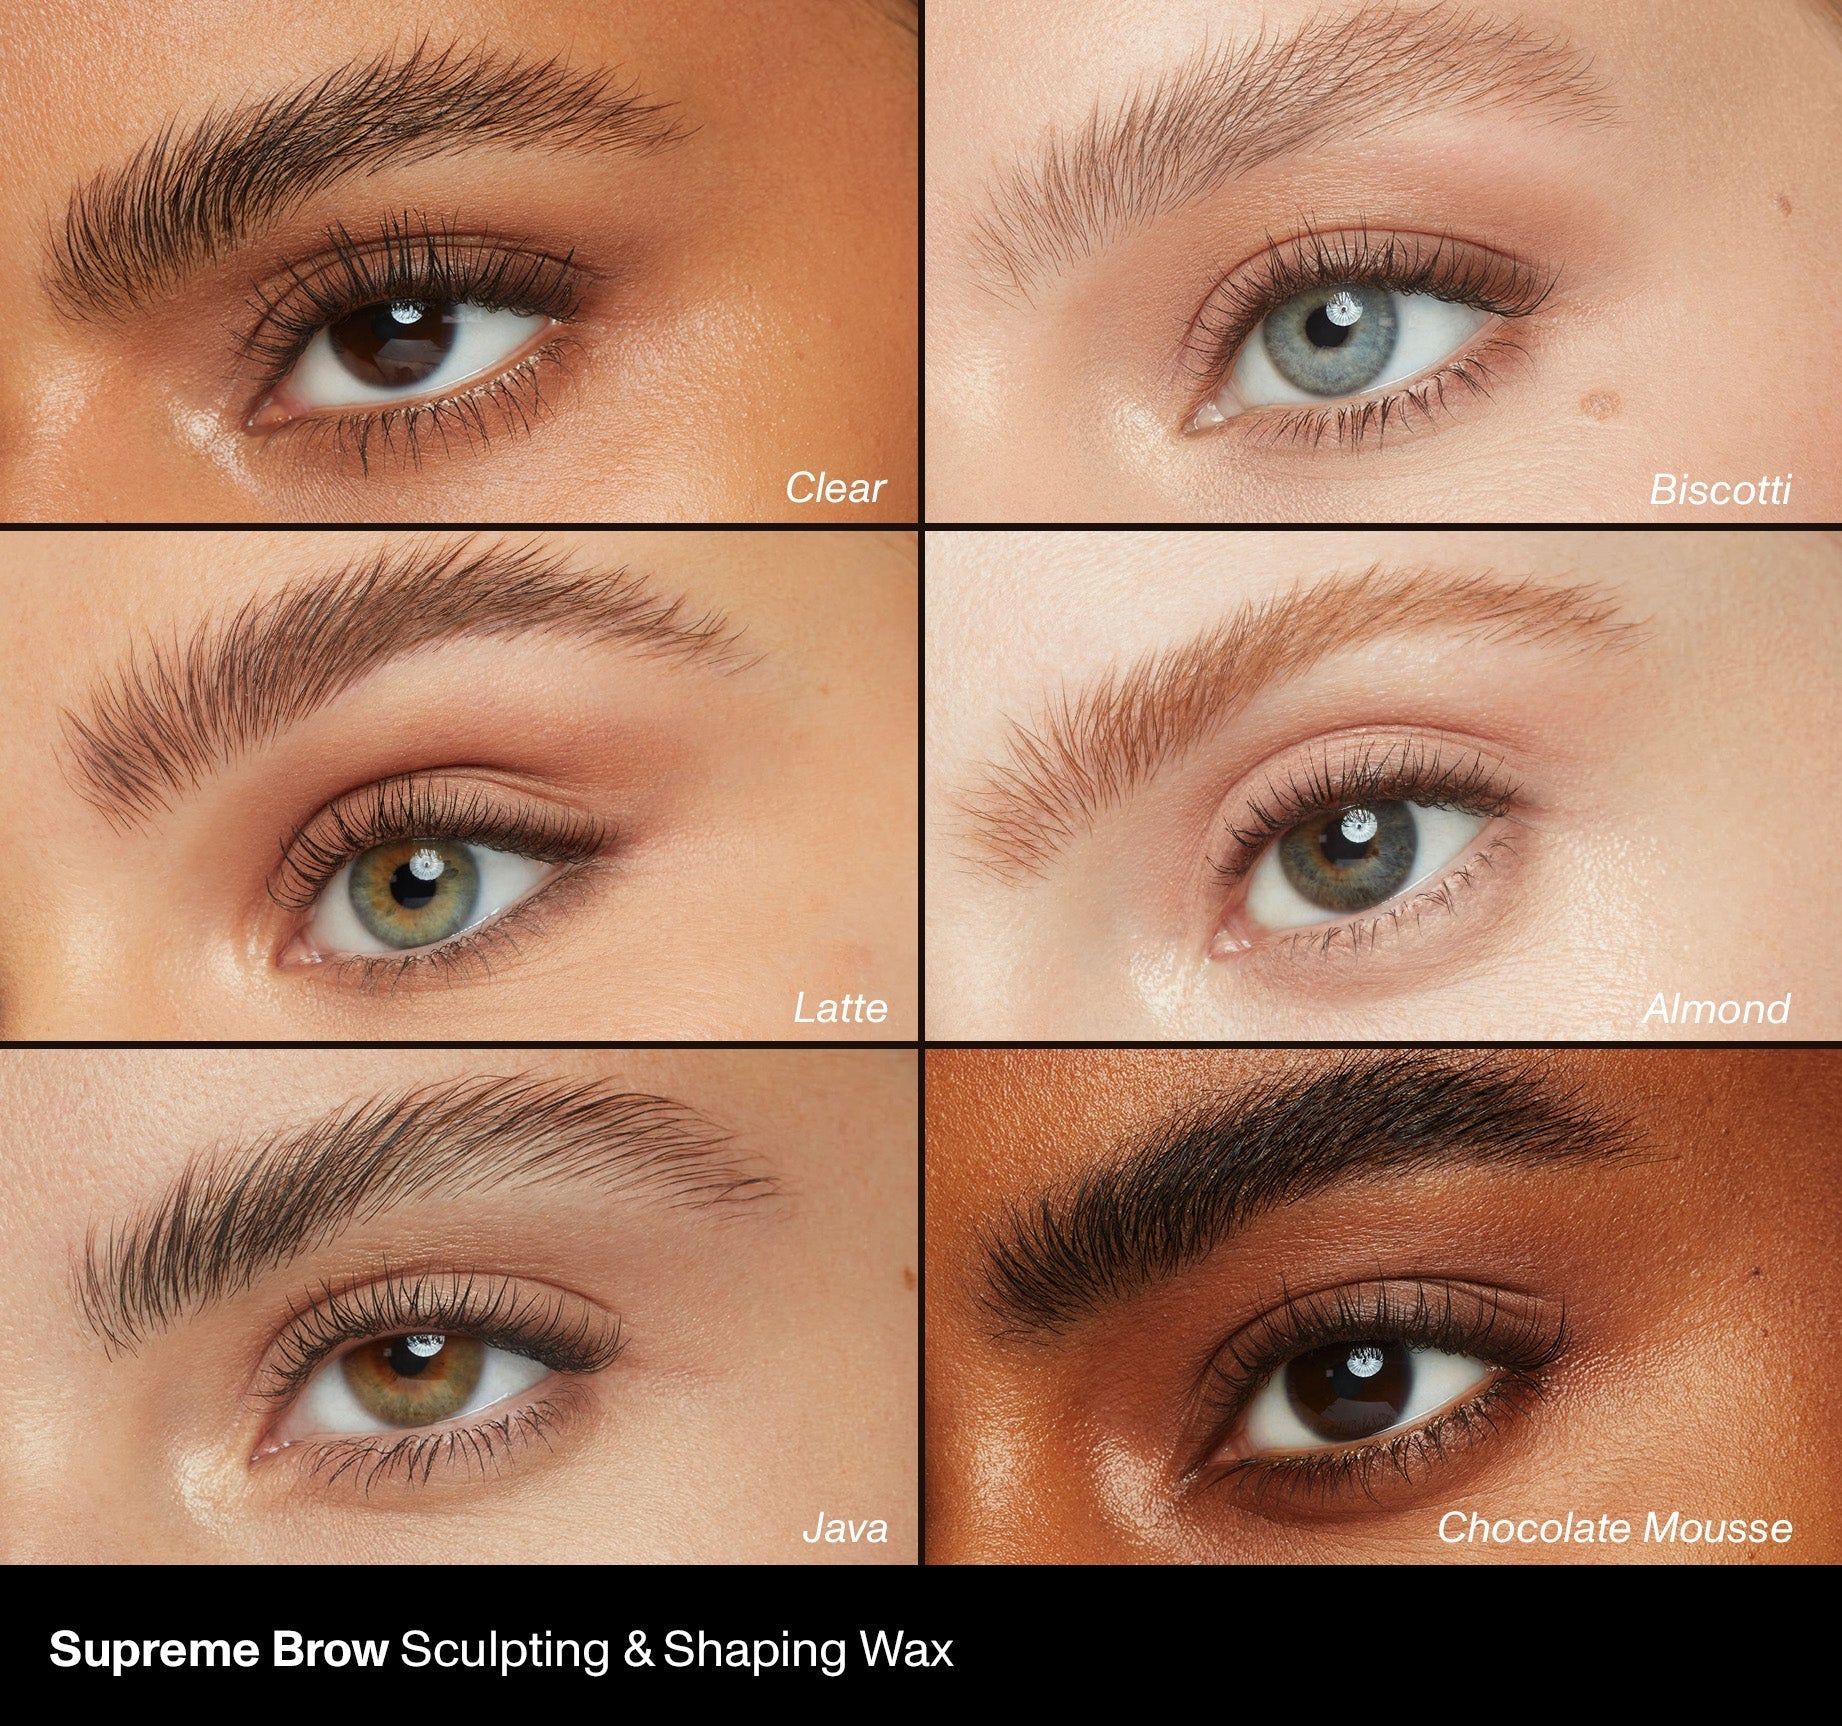 Supreme Brow Sculpting And Shaping Wax - Latte - Image 3